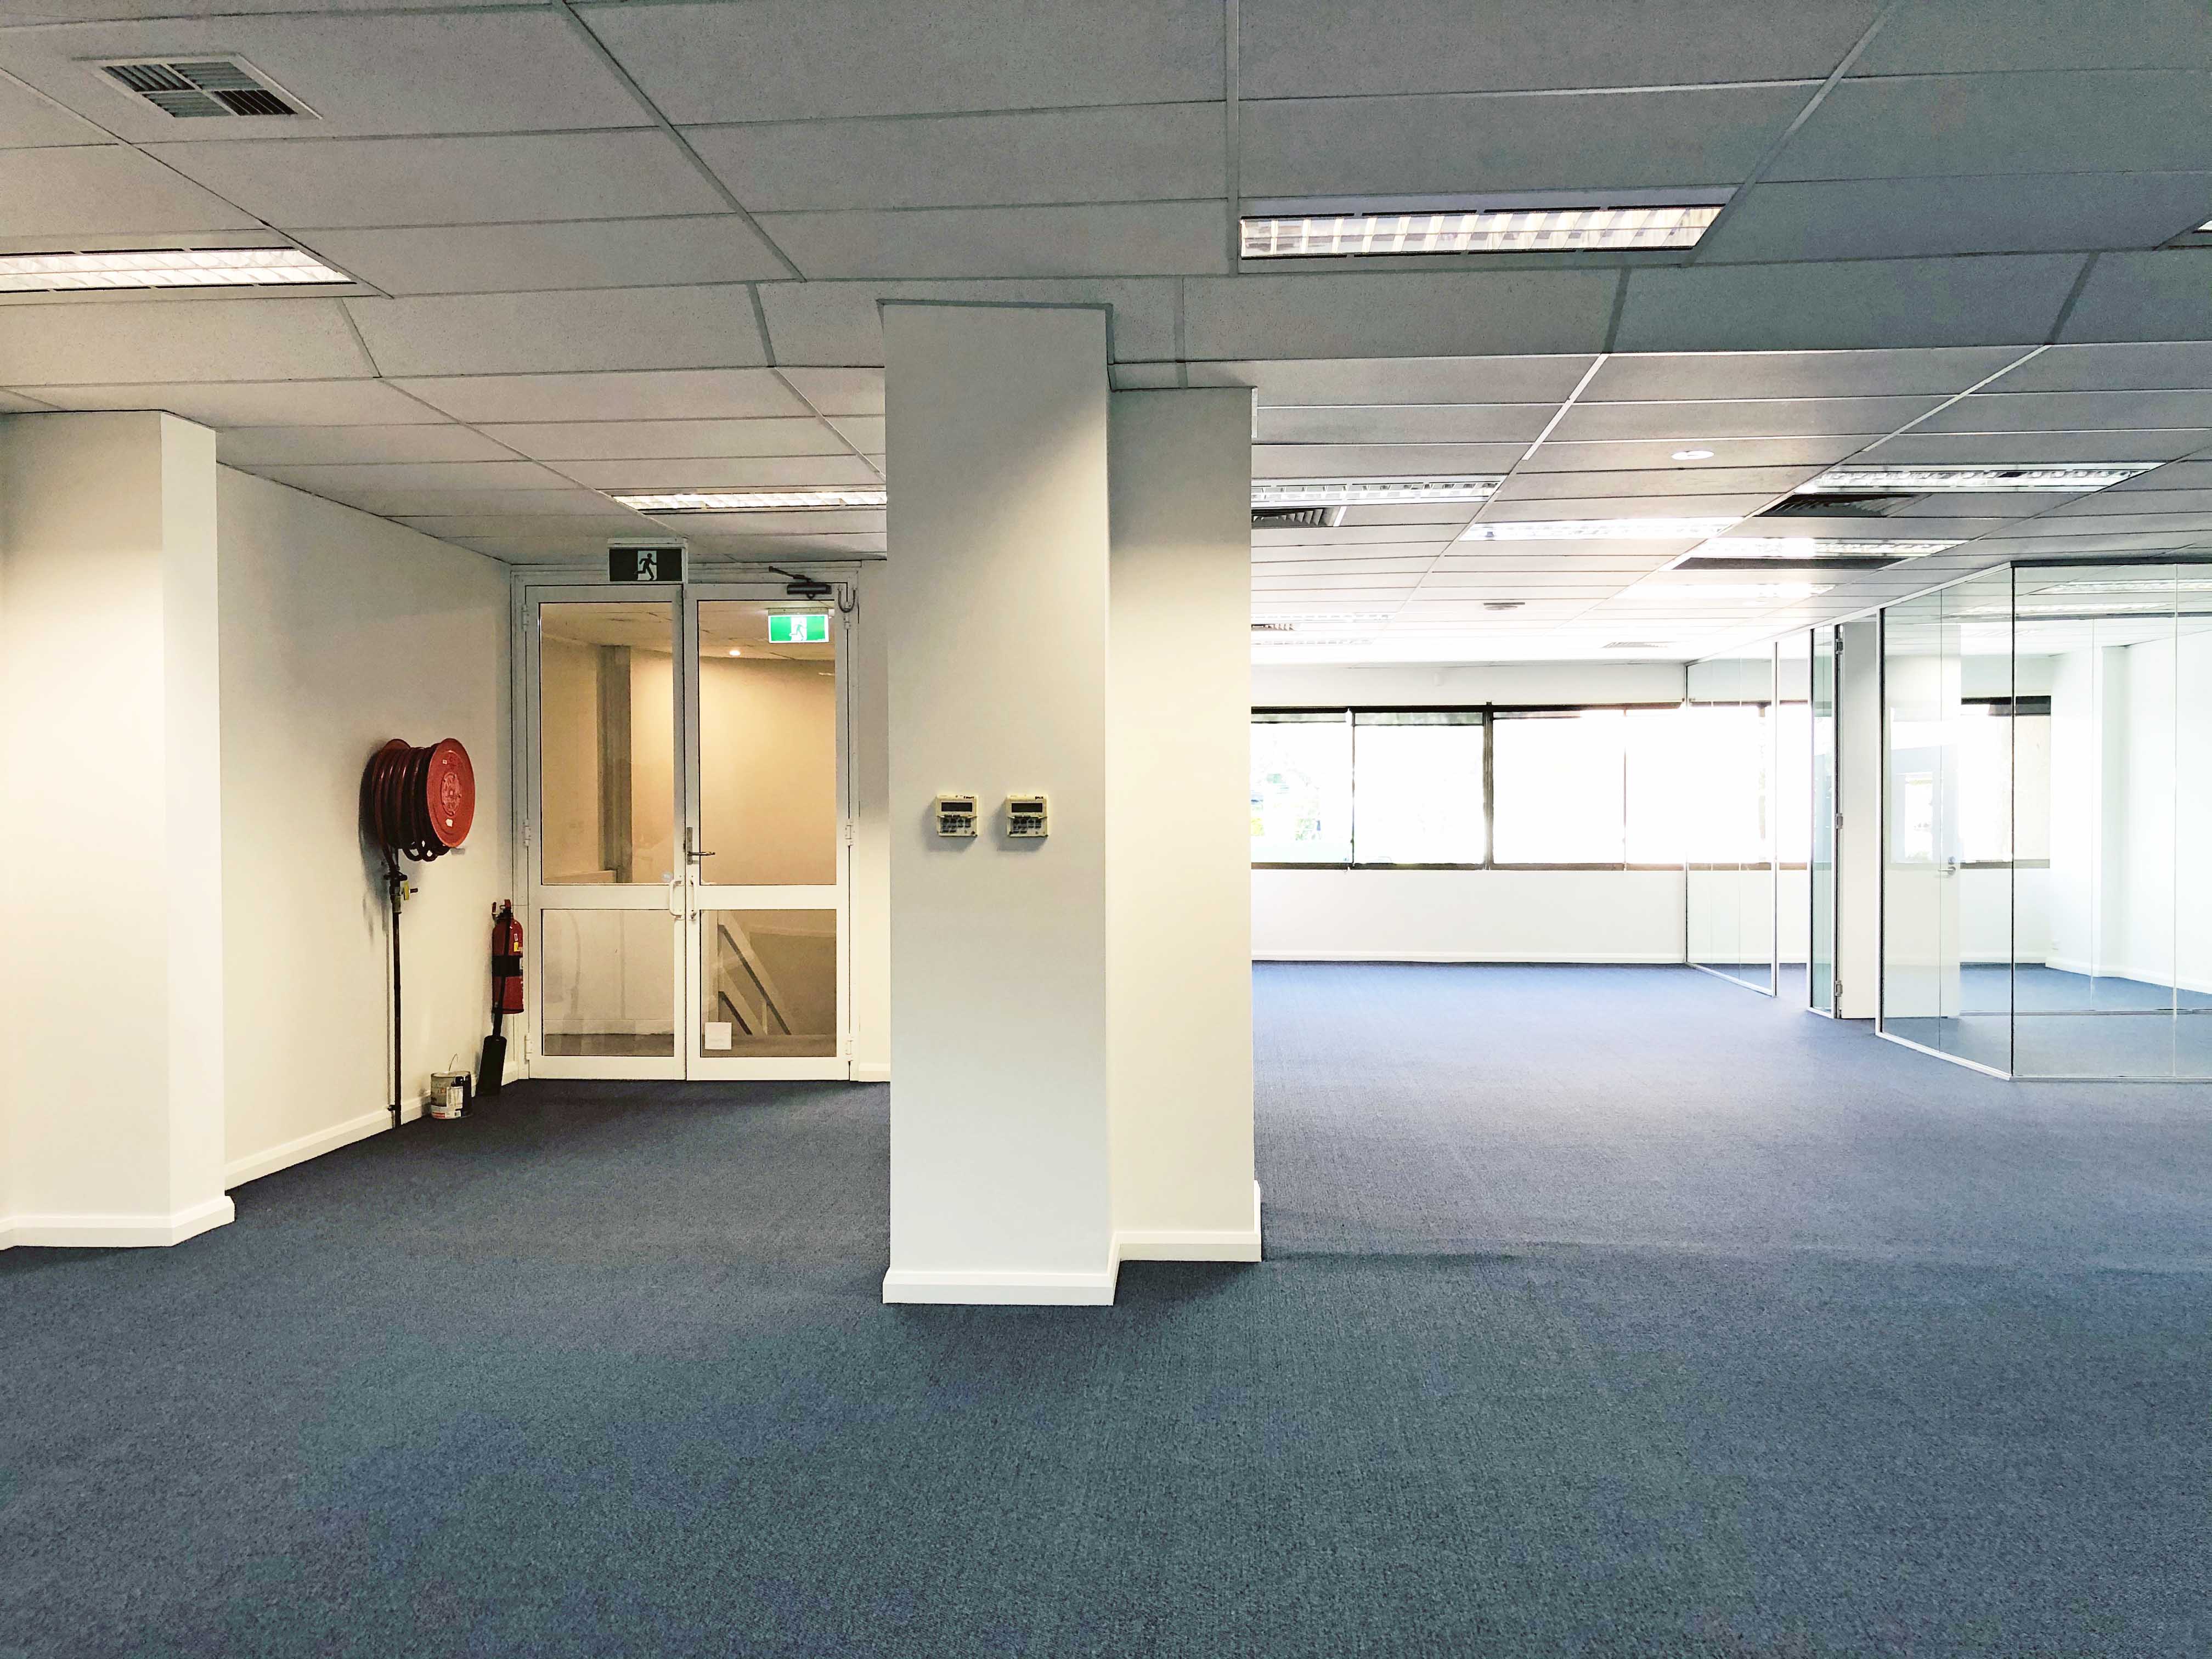 Commercial property for lease in macquarie park 4